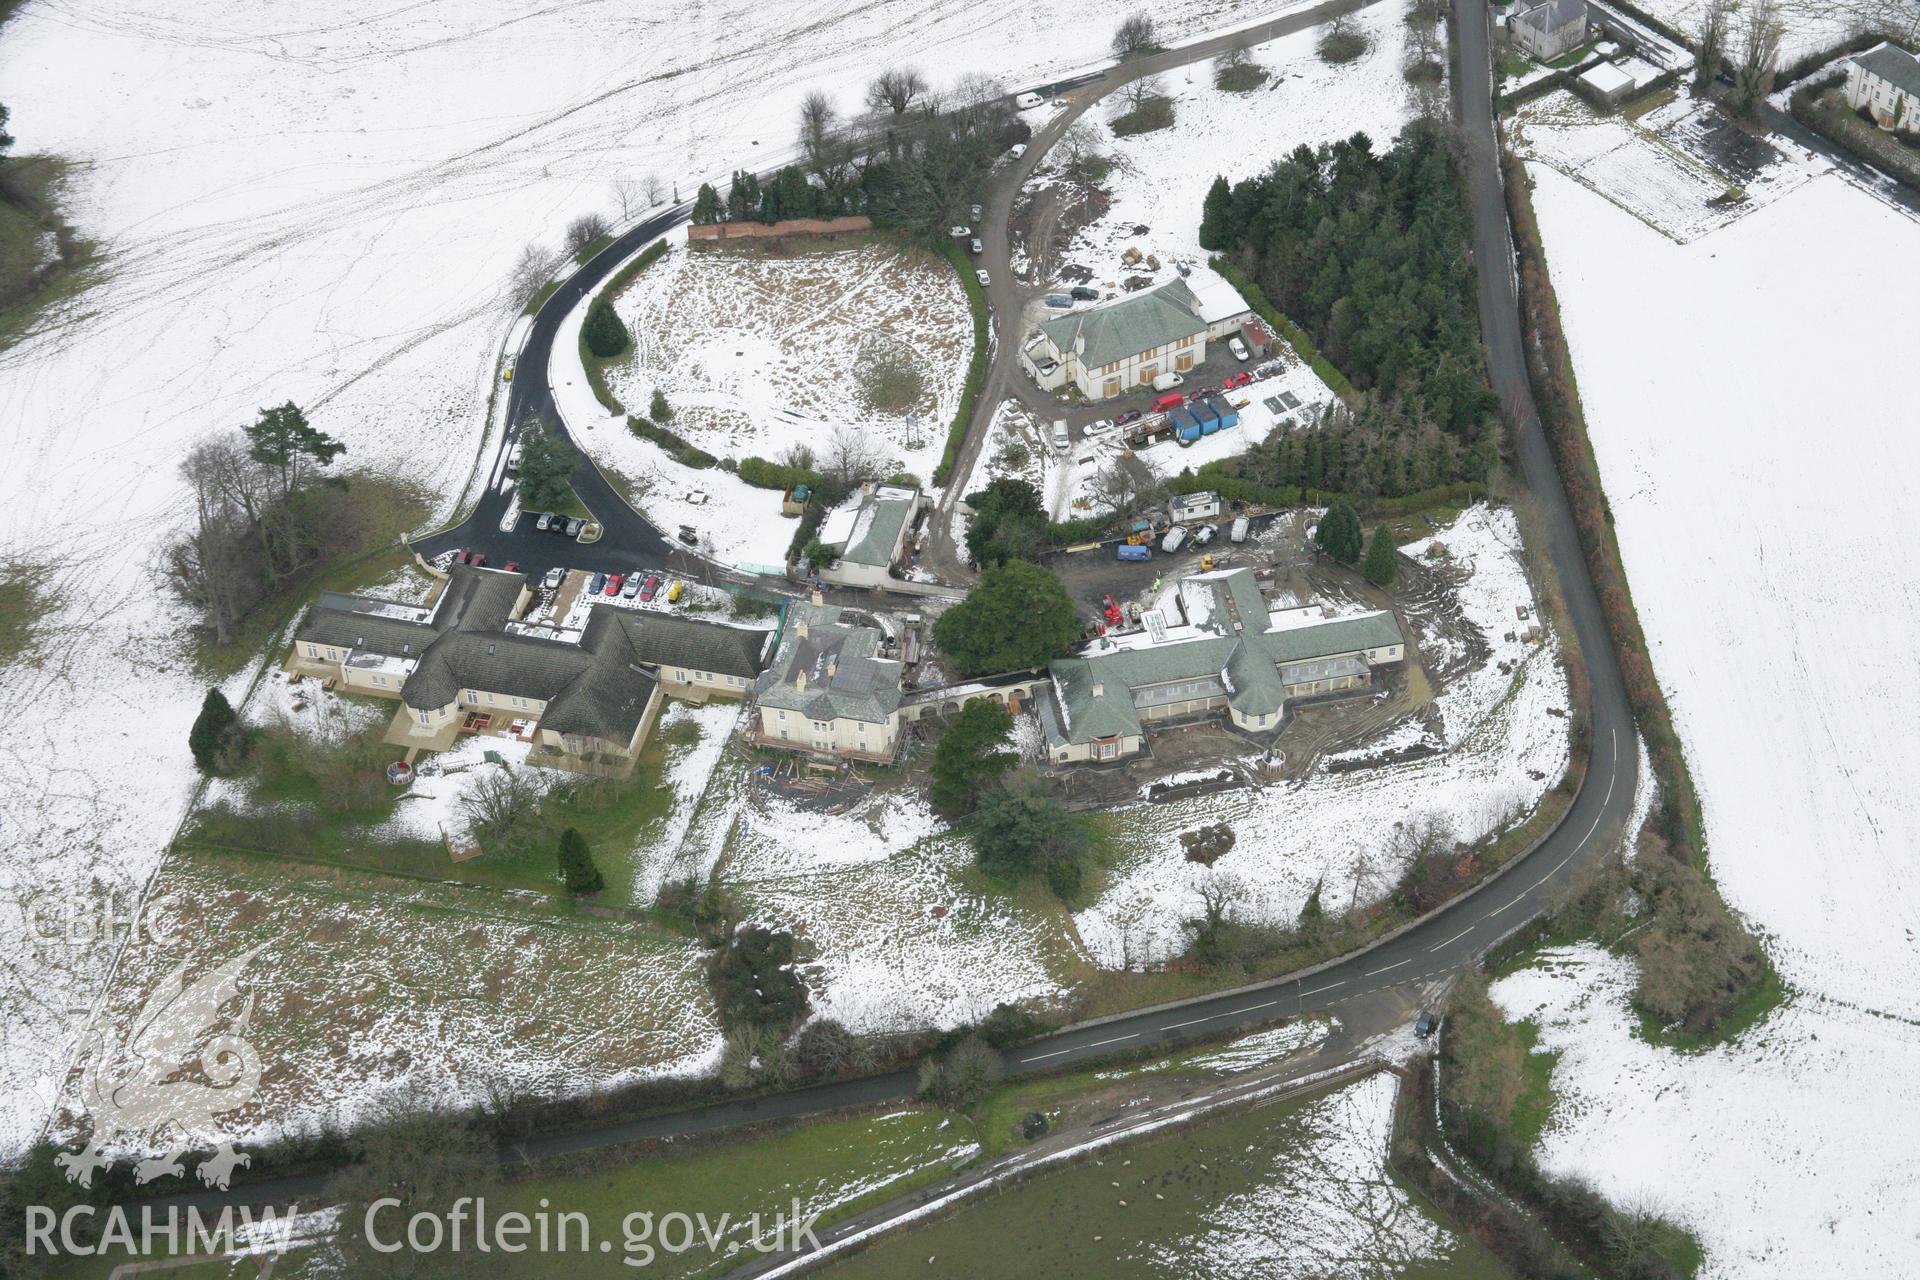 RCAHMW colour oblique aerial photograph of Gwynfryn (North Wales Counties Mental Hospital), from the south-west. Taken on 06 March 2006 by Toby Driver.